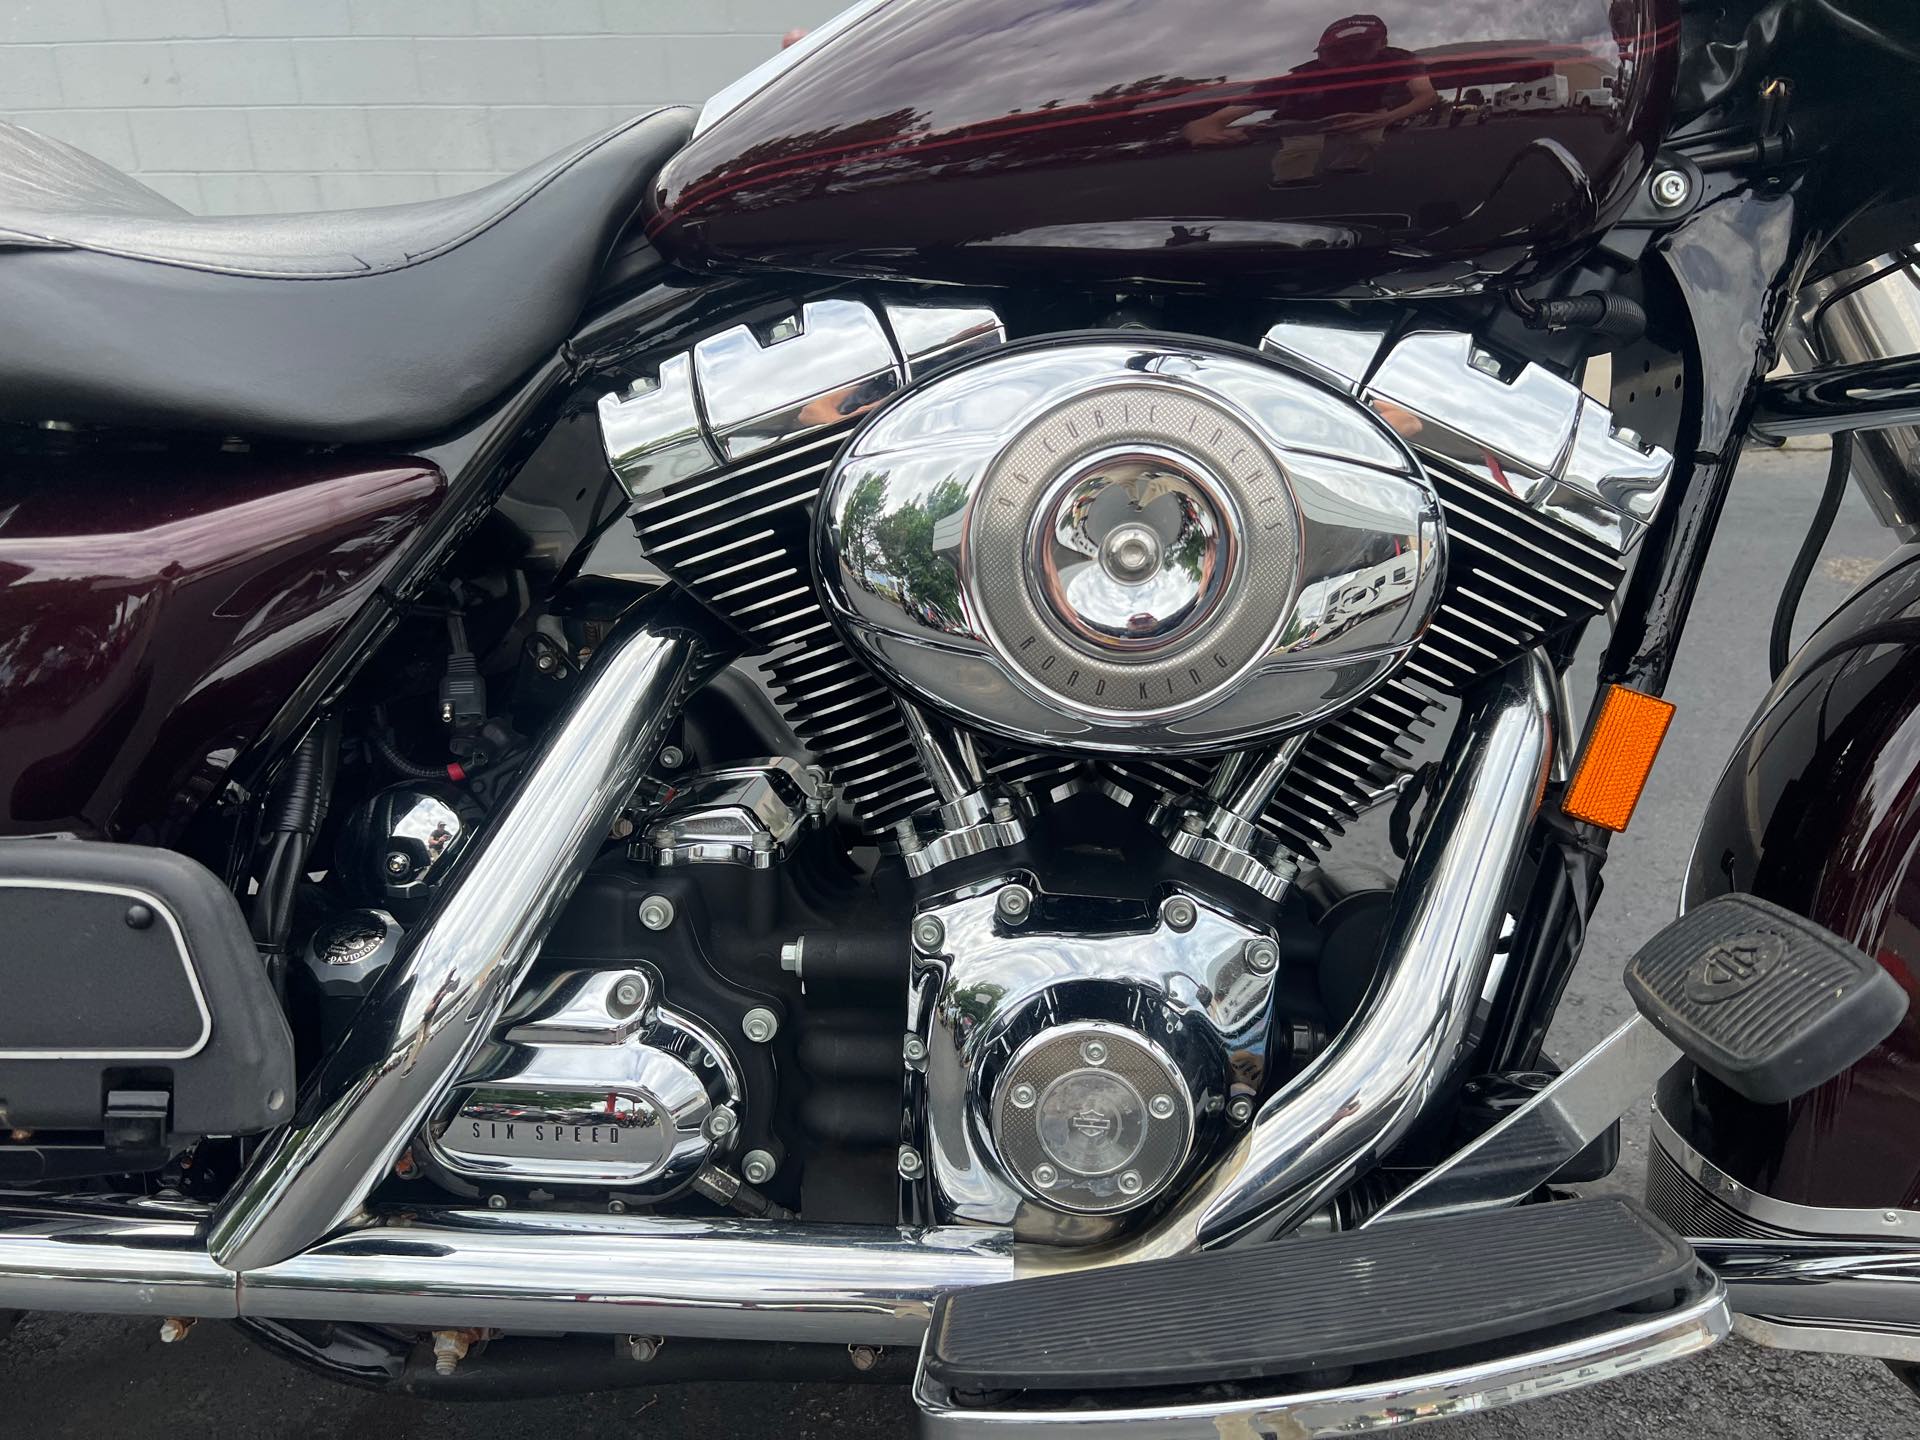 2007 Harley-Davidson Road King Classic at Aces Motorcycles - Fort Collins